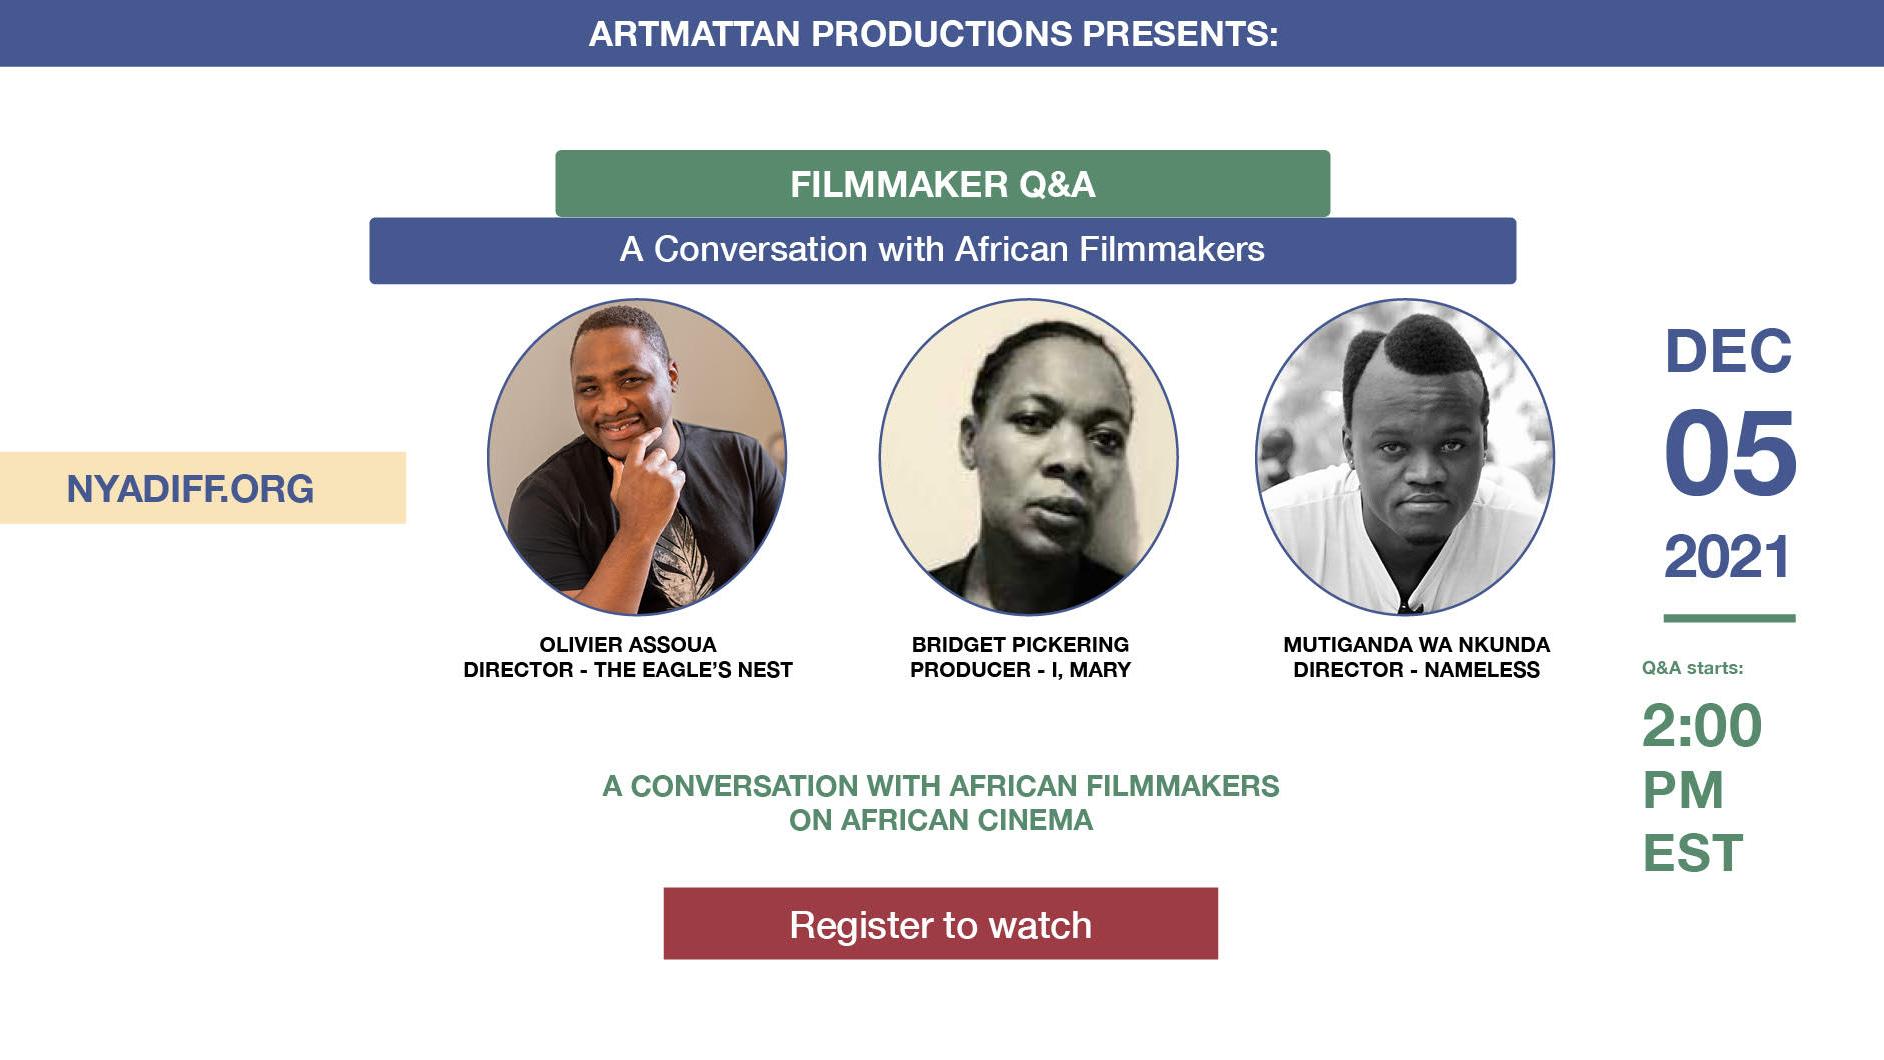 A Conversation with African Filmmakers